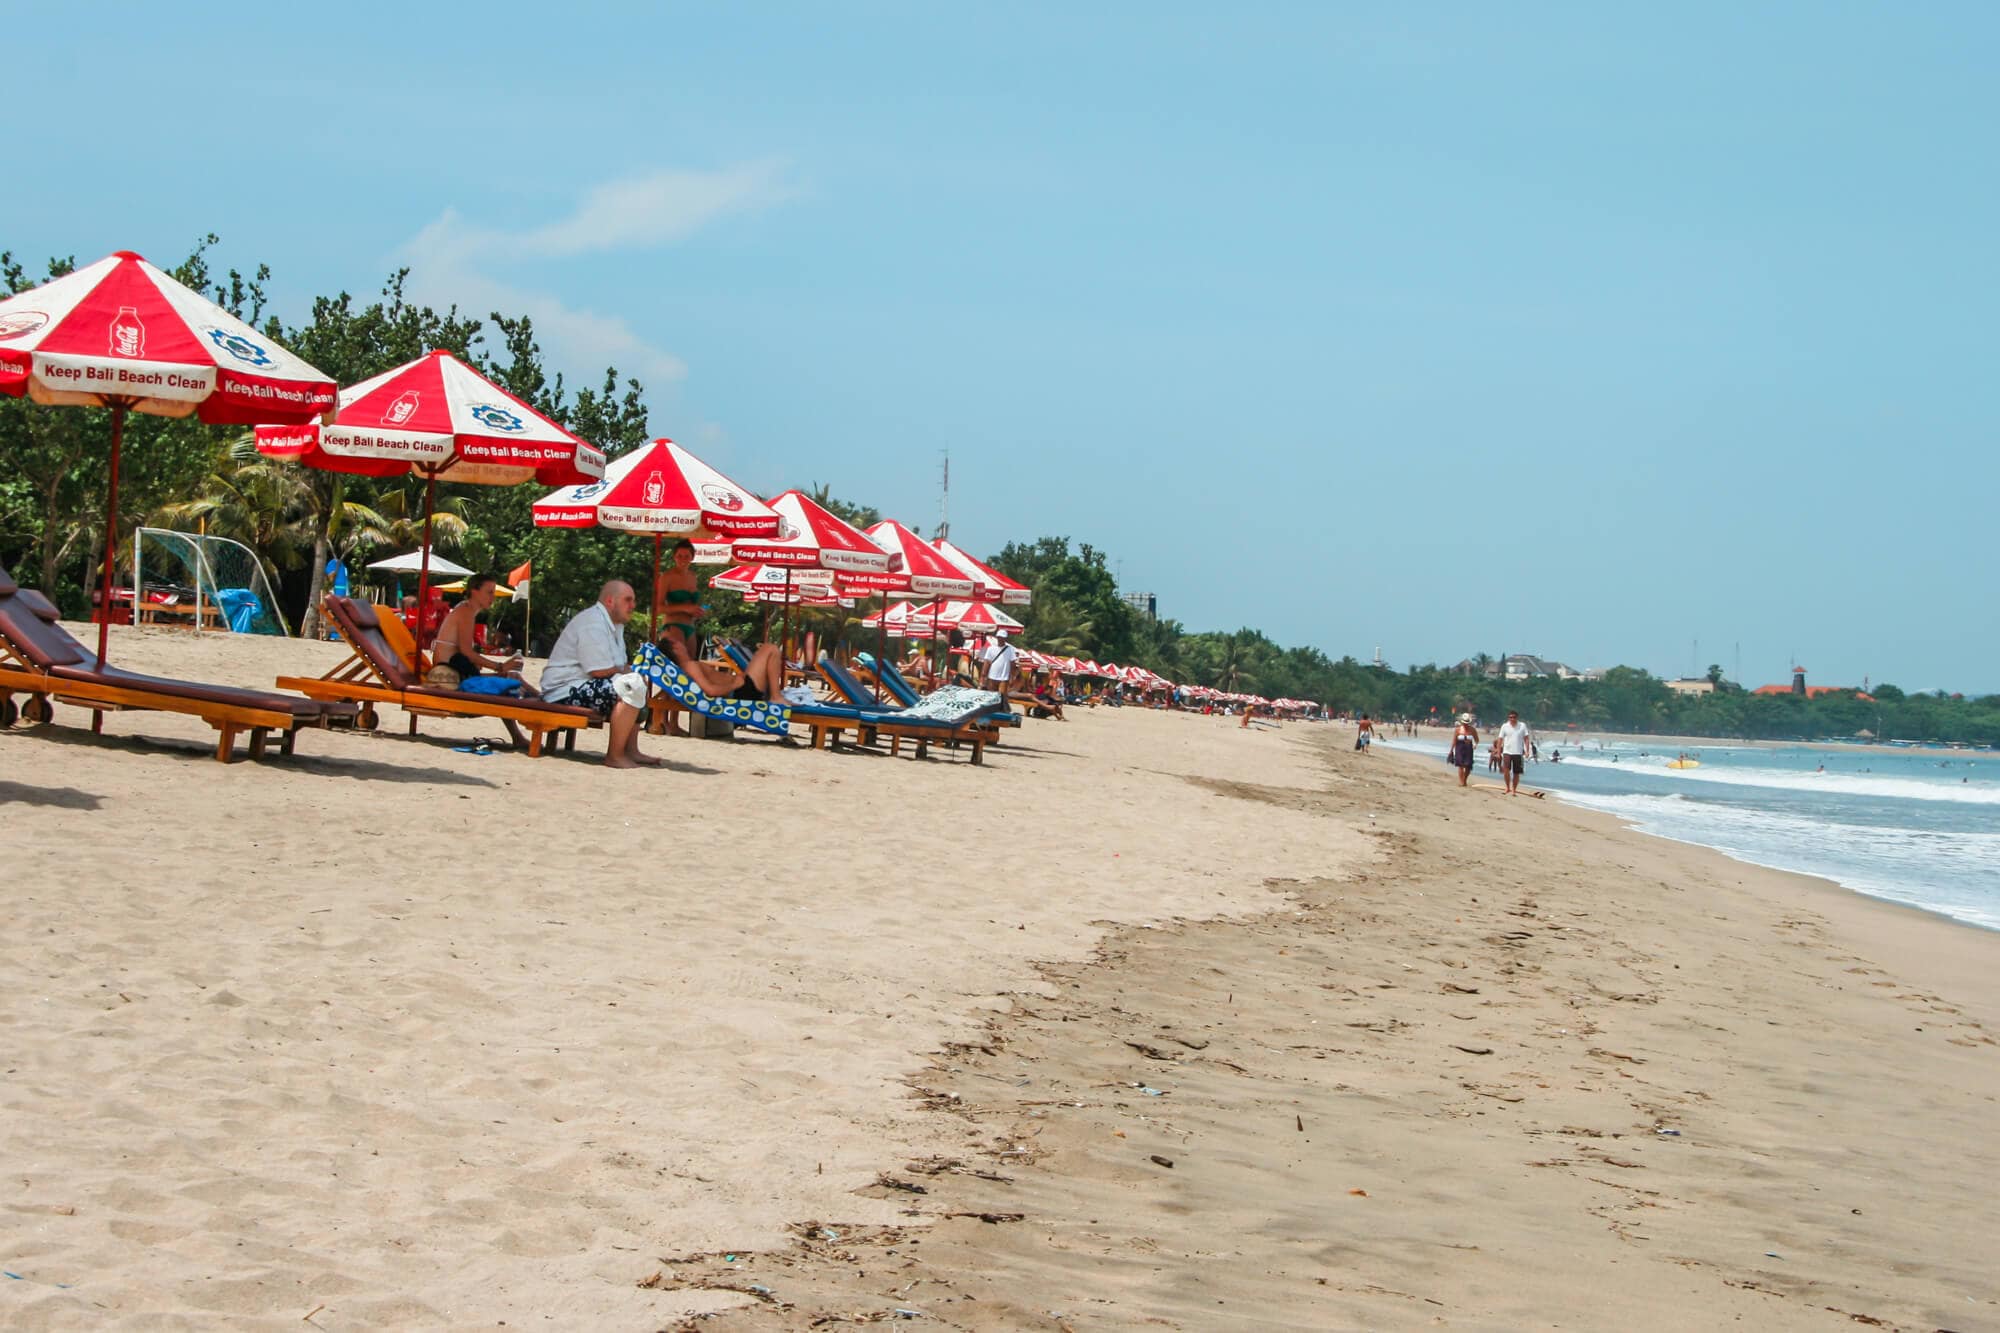 A row of sunbeds with red and white umbrellas on Kuta Beach, one of the best areas to stay in Bali for backpackers.